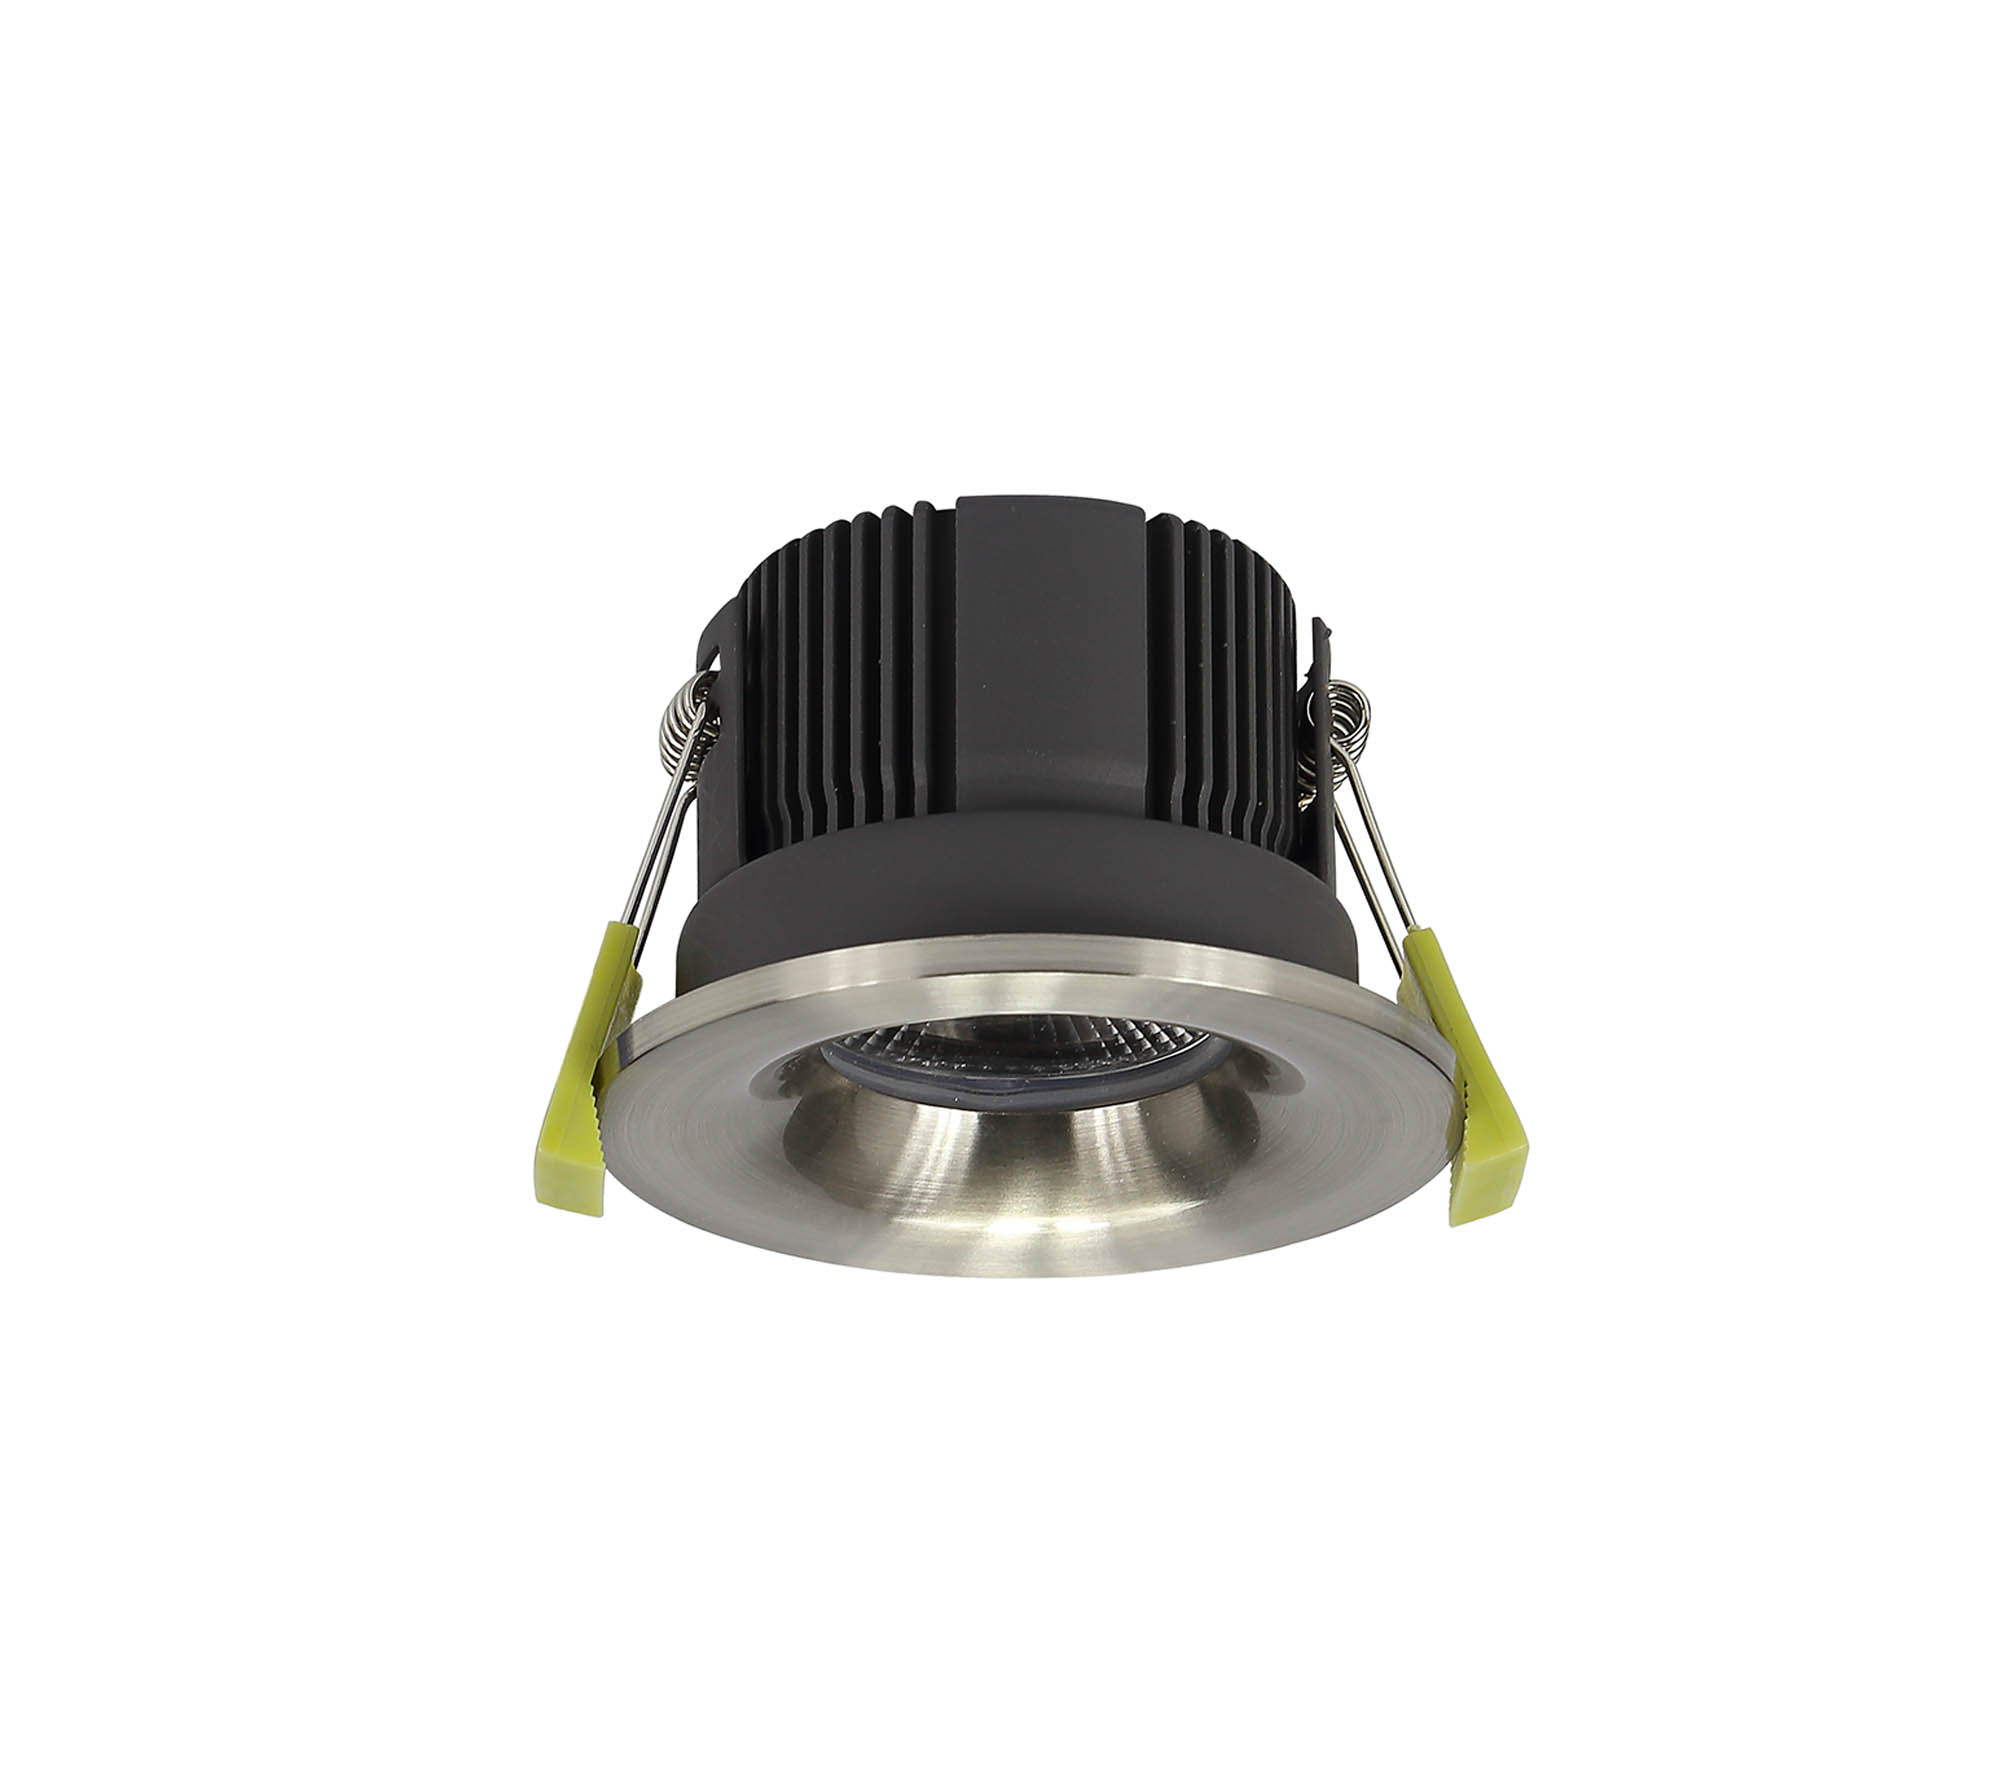 DM200692  Beck 11 FR; 11W; IP65 Satin Nickel LED Recessed Curved Fire Rated Downlight; Cut Out 68mm; 5000K; PLUG IN DRIVER INCLUDED; 3yrs Warranty